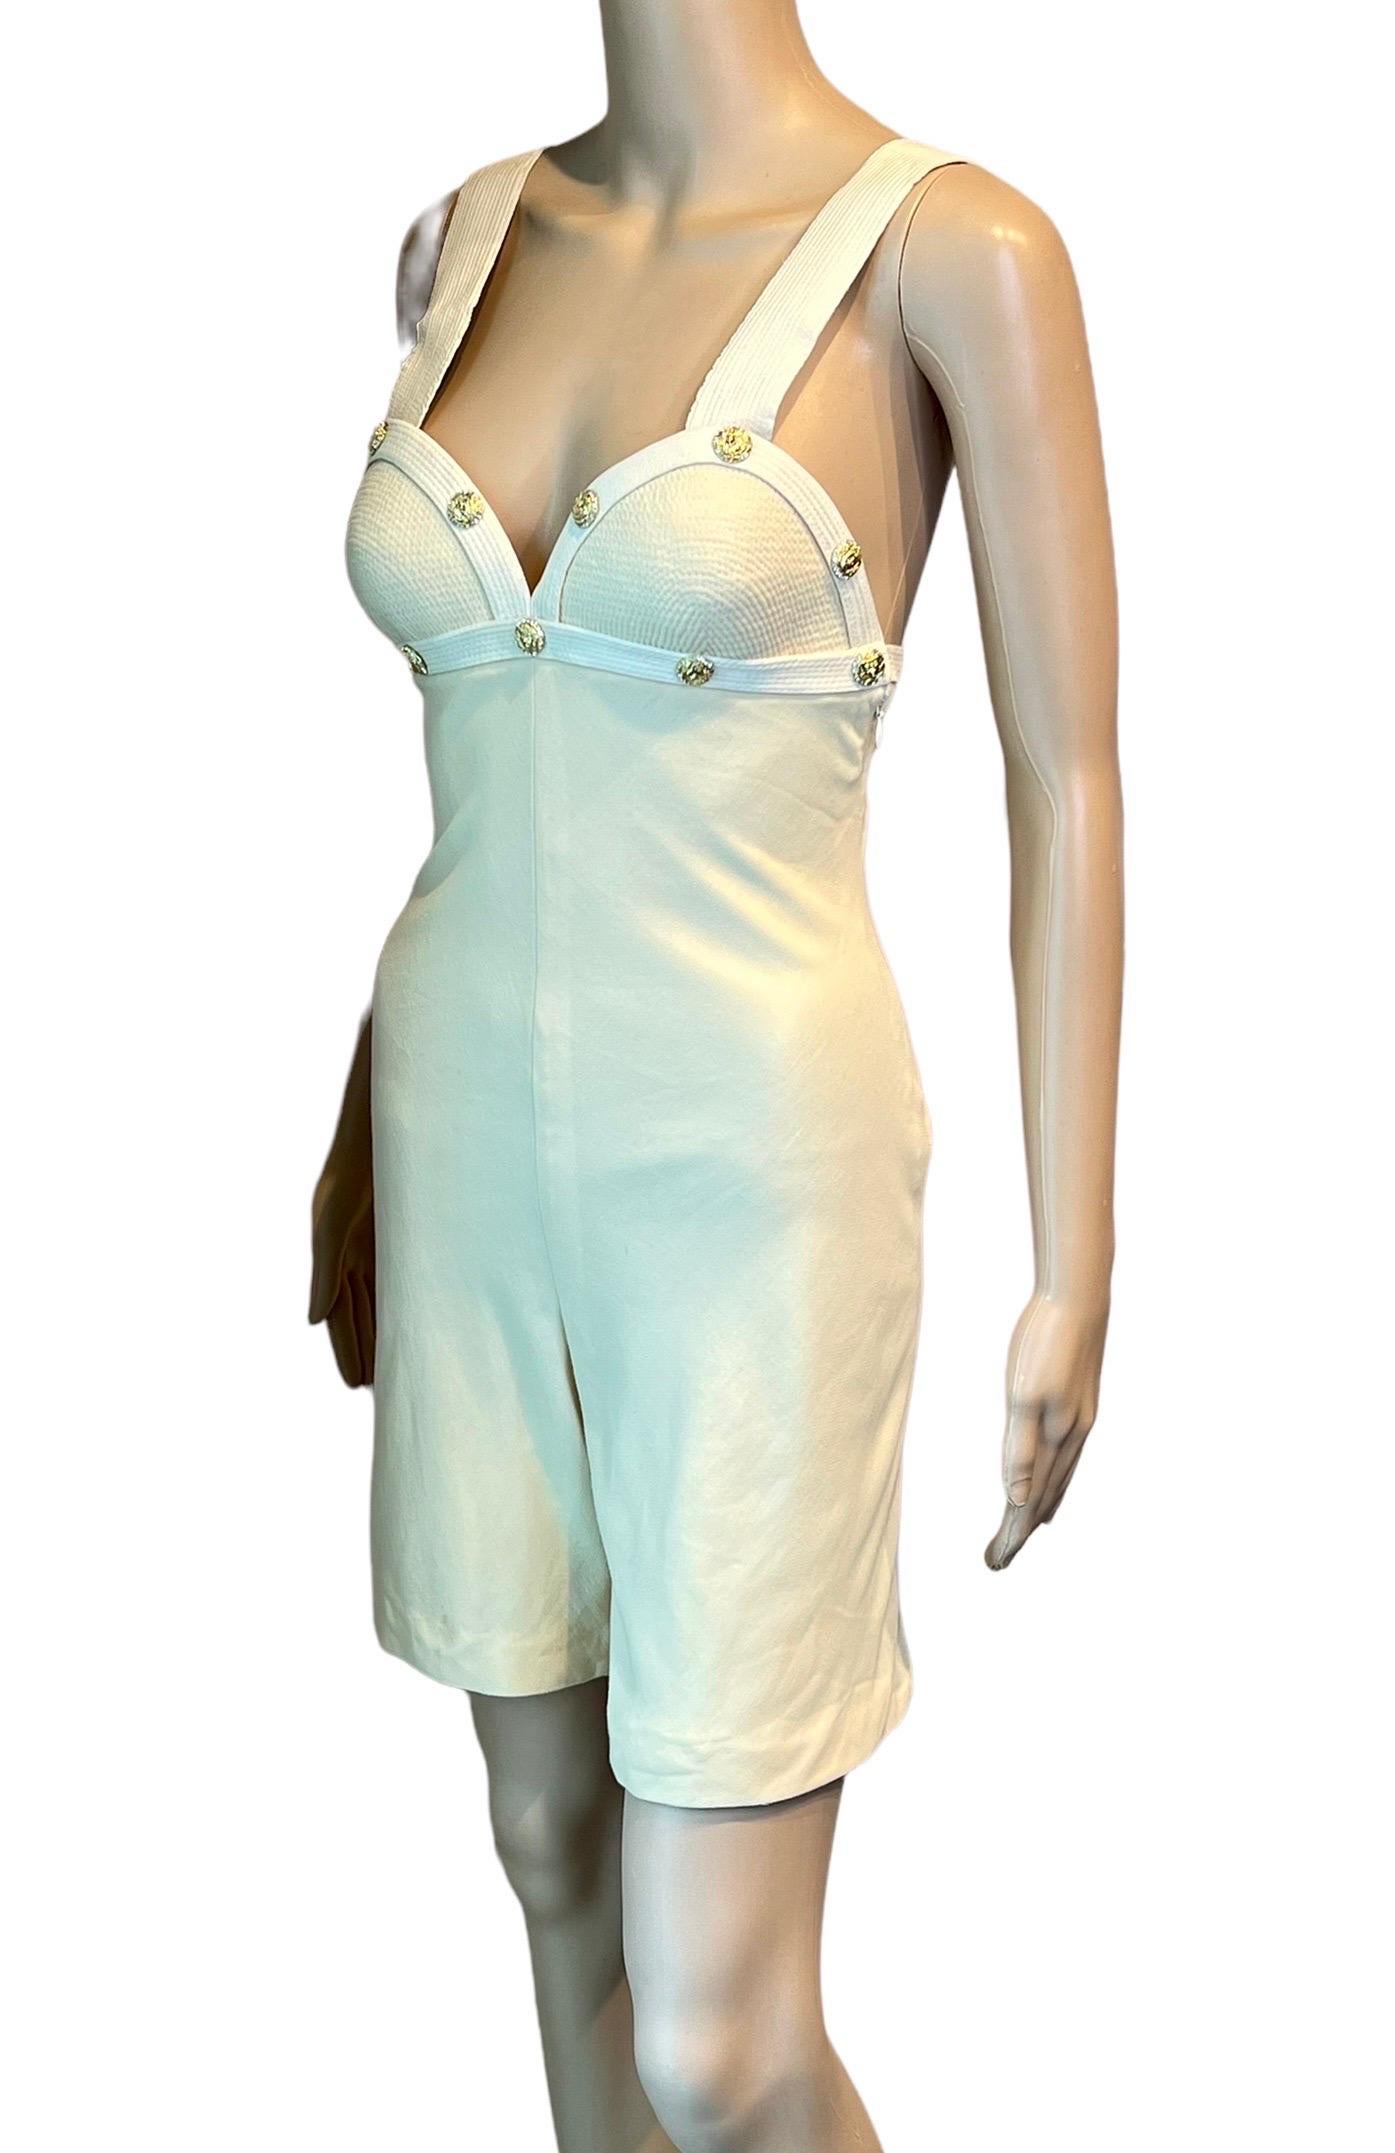 Gianni Versace S/S 1992 Runway Vintage Bustier Embellished Ivory Romper Jumpsuit In Good Condition For Sale In Naples, FL